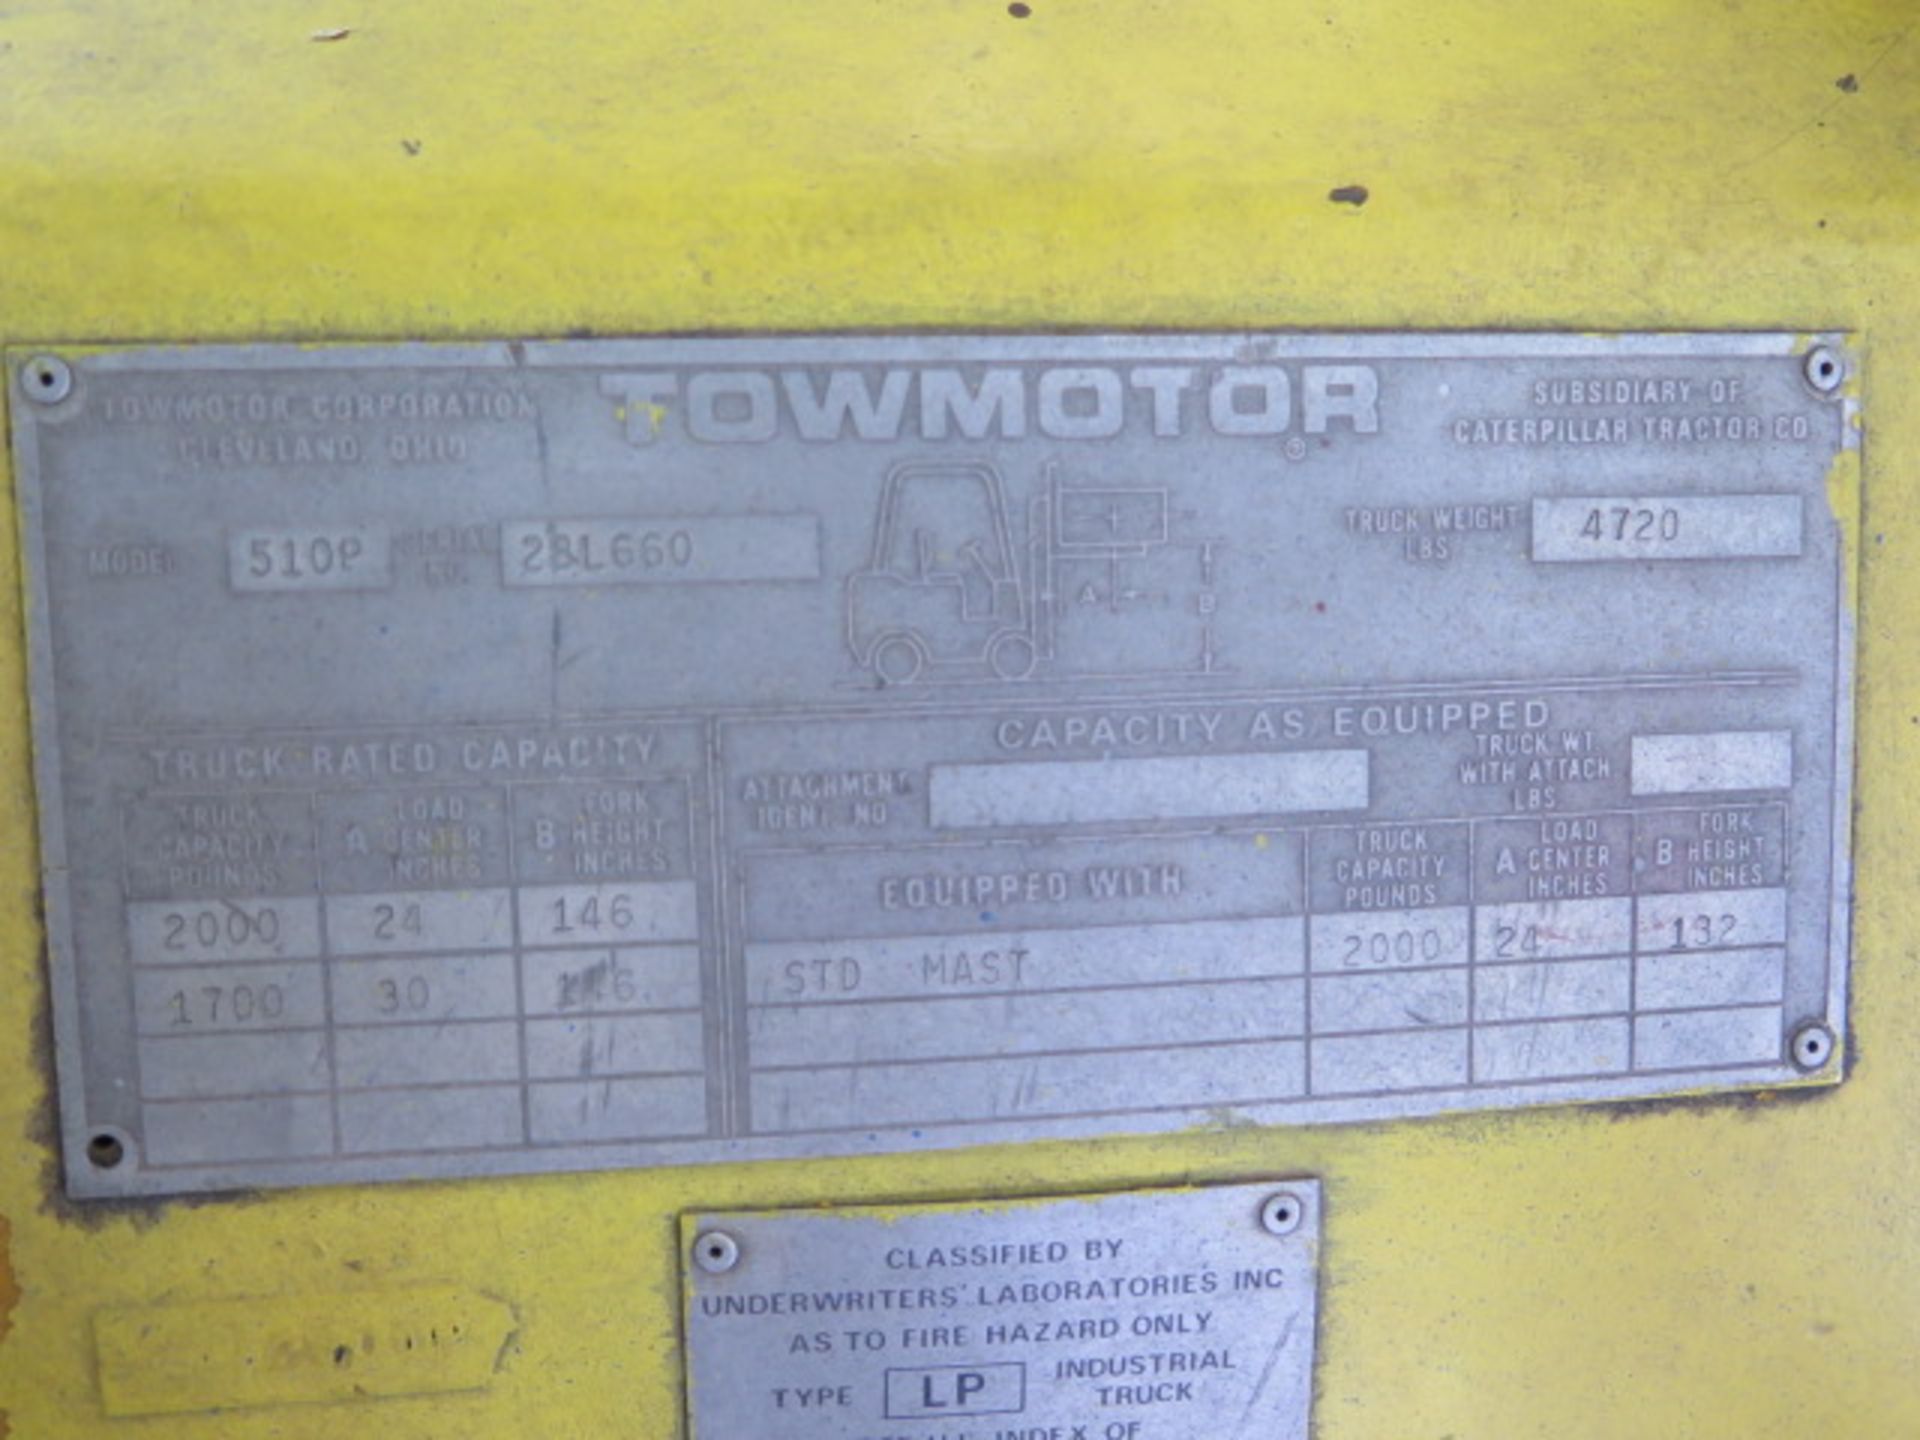 Towmotor mdl. 510P 2000 Lb Cap LPG Forklift s/n 28L660 w/ 2-Stage Mast, 146” Lift Height, Solid - Image 4 of 4